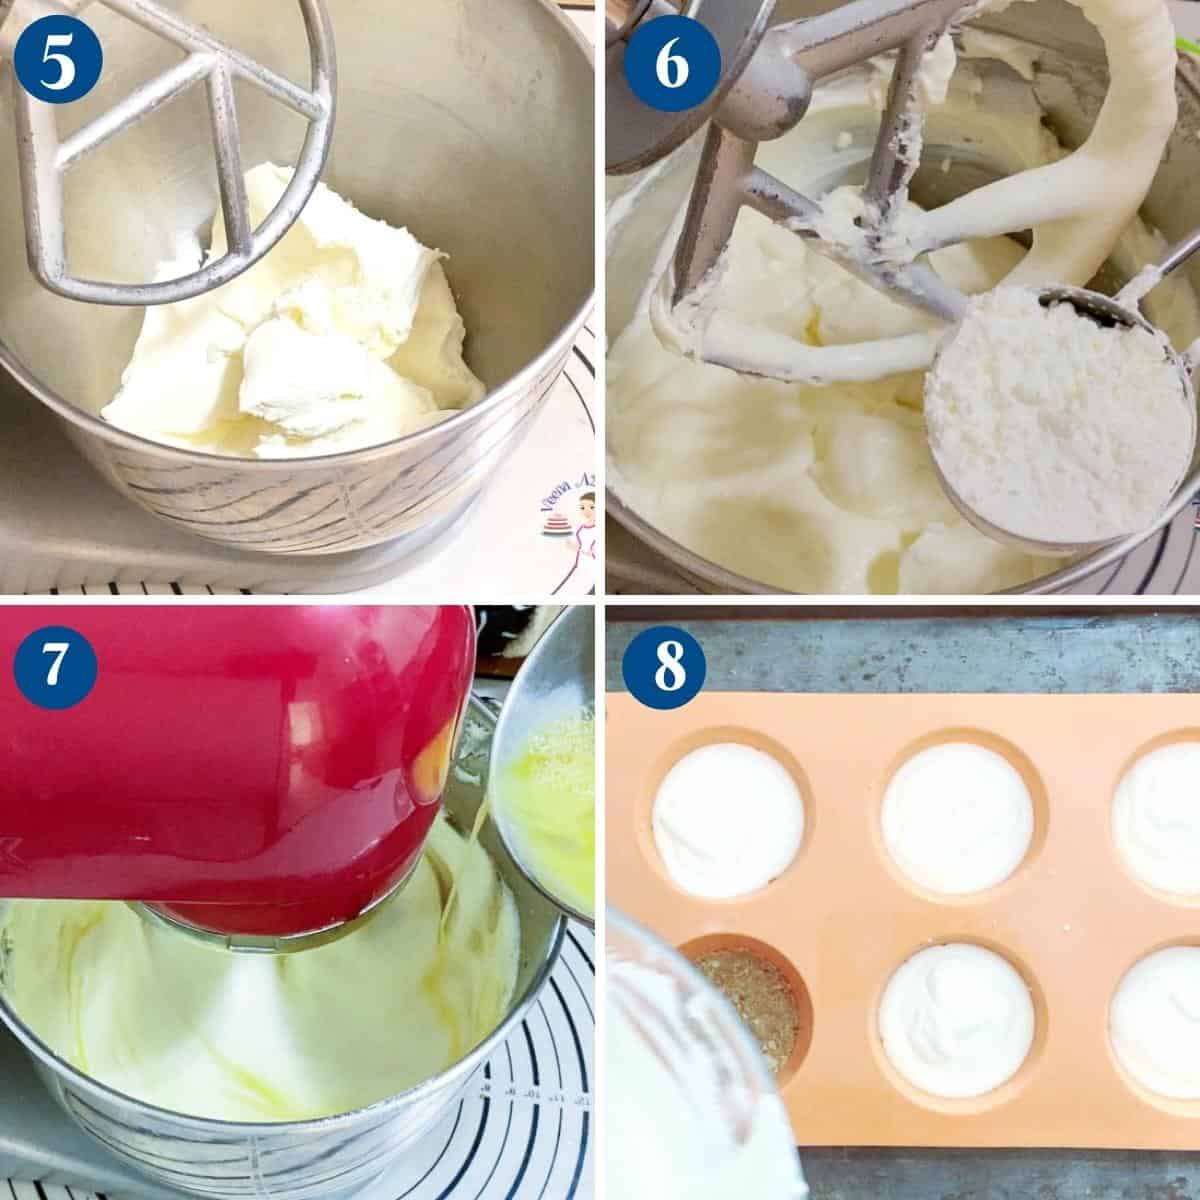 Progress pictures collage making cheesecake batter.